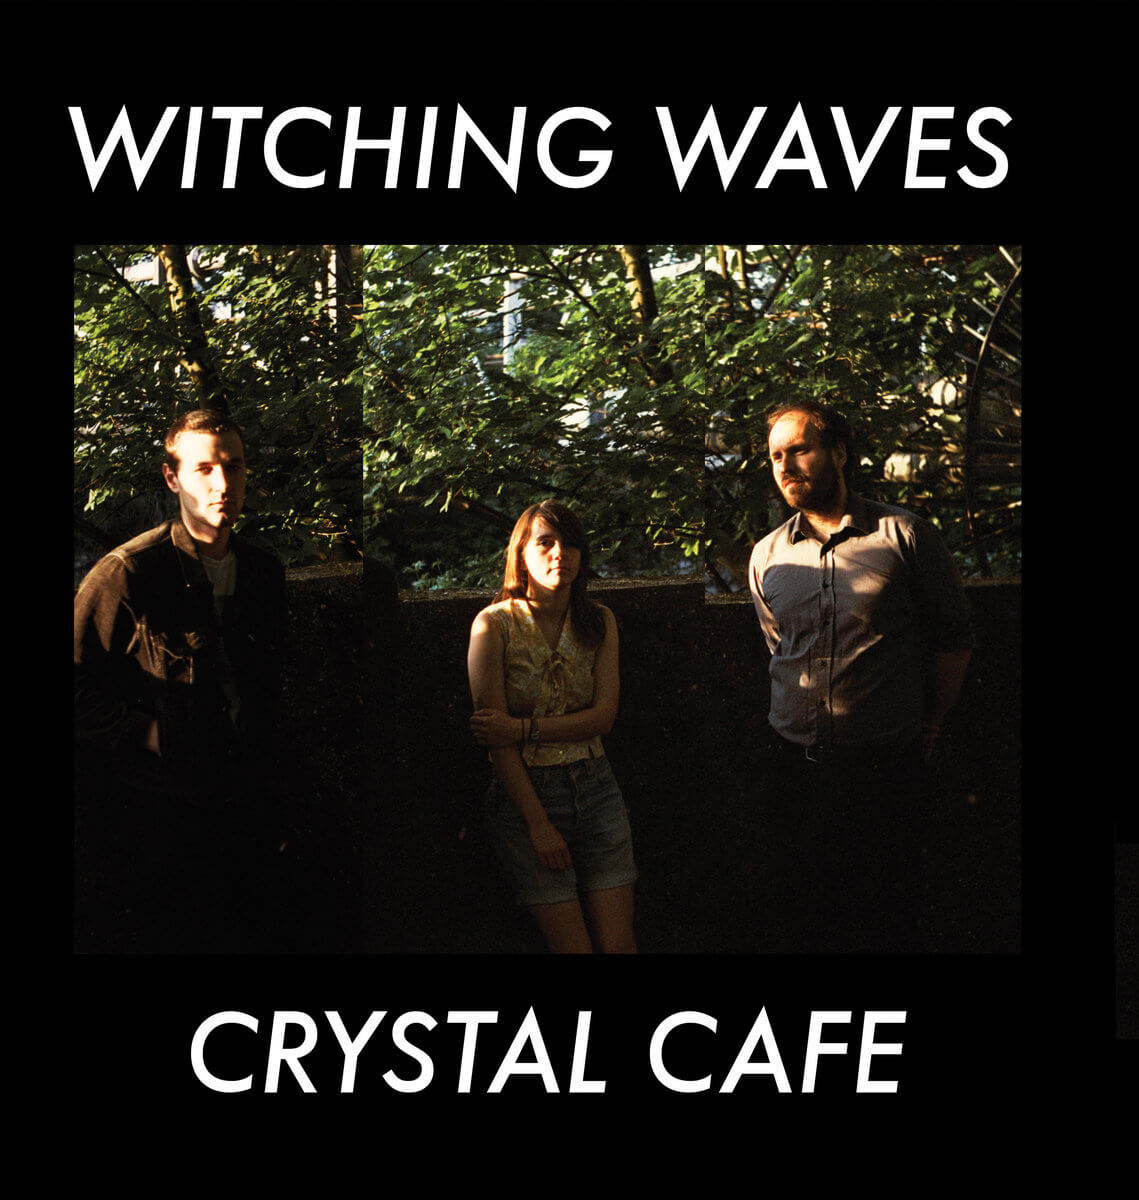 VINYL OF THE MONTH:  Witching Waves “Crystal Cafe” Review